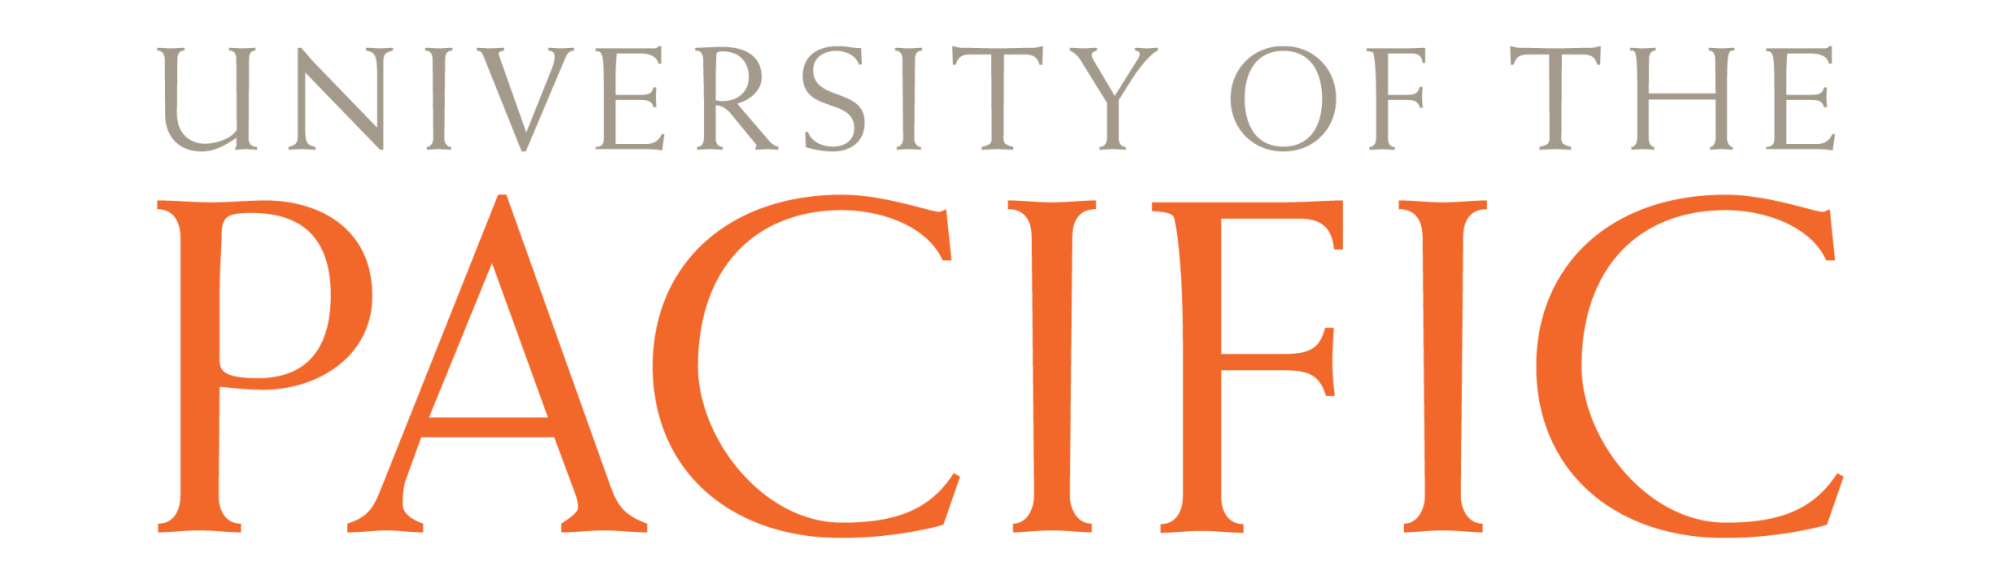 University of the Pacific Logo, visit link by clicking